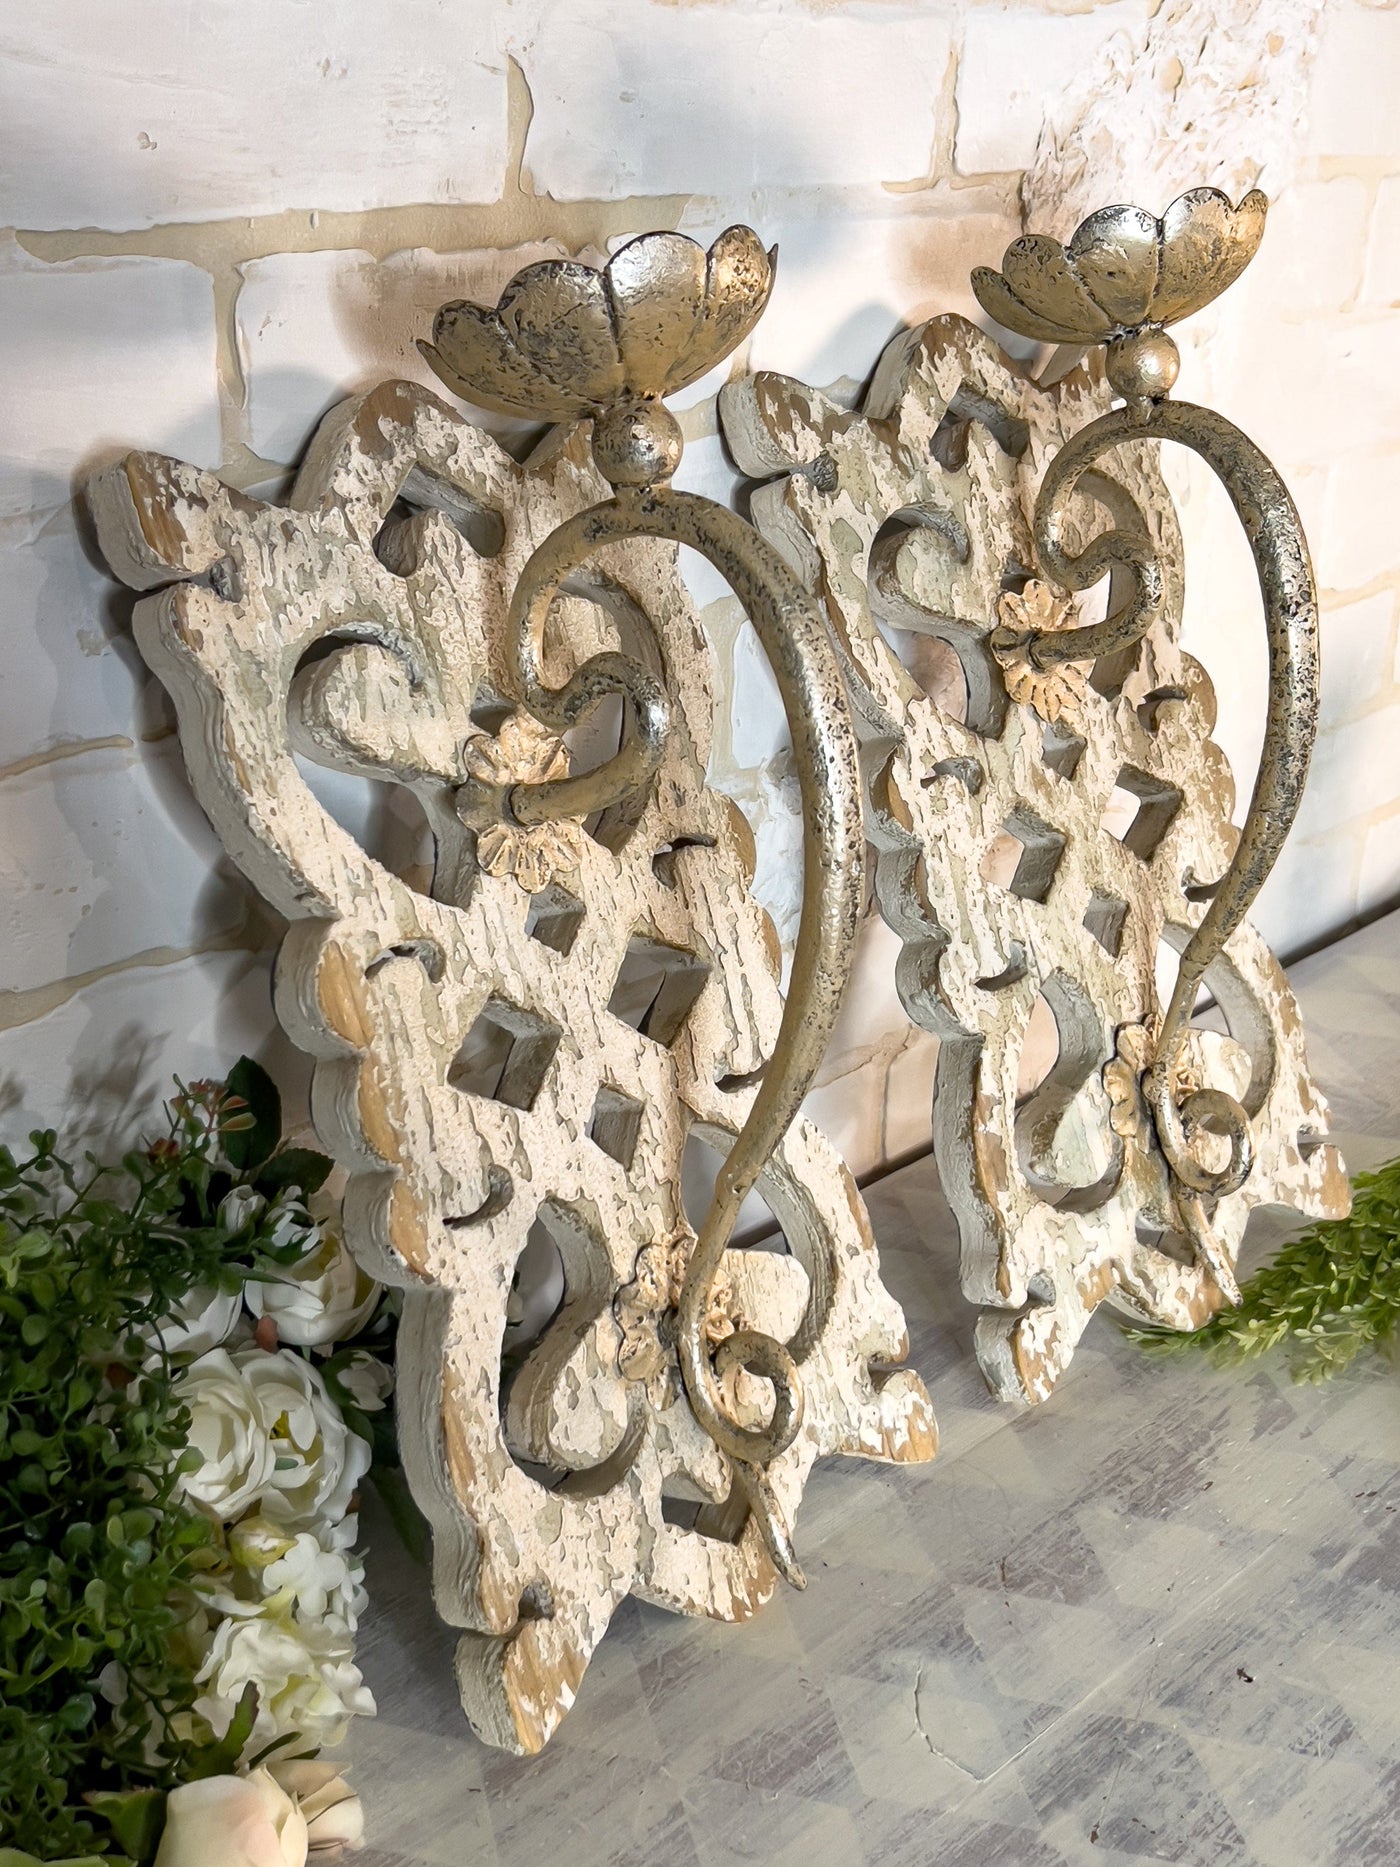 FRENCH COUNTRY CHIPPY CANDLE SCONCES (SET OF 2) Revive In Style Vintage Furniture Painted Refinished Redesign Beautiful One of a Kind Artistic Antique Unique Home Decor Interior Design French Country Shabby Chic Cottage Farmhouse Grandmillenial Coastal Chalk Paint Metallic Glam Eclectic Quality Dovetailed Rustic Furniture Painter Pinterest Bedroom Living Room Entryway Kitchen Home Trends House Styles Decorating ideas